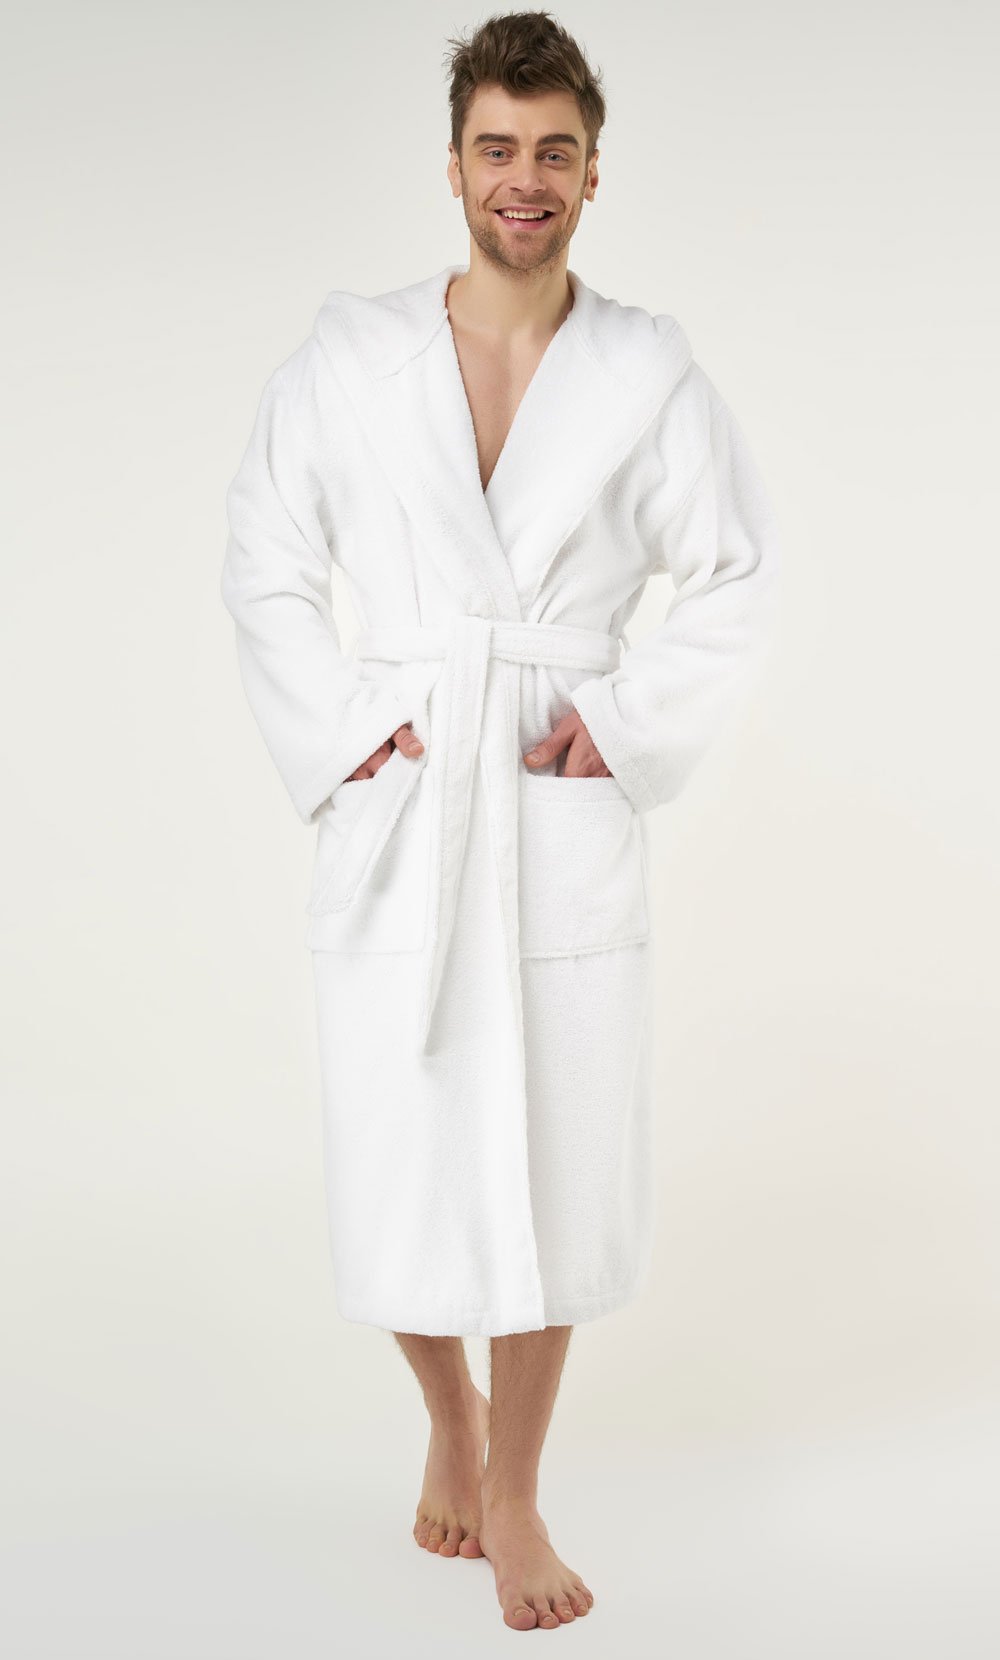 MENS 100% COTTON 550 GSM TERRY HOODED BATHROBE WHITE DRESSING GOWN L XL